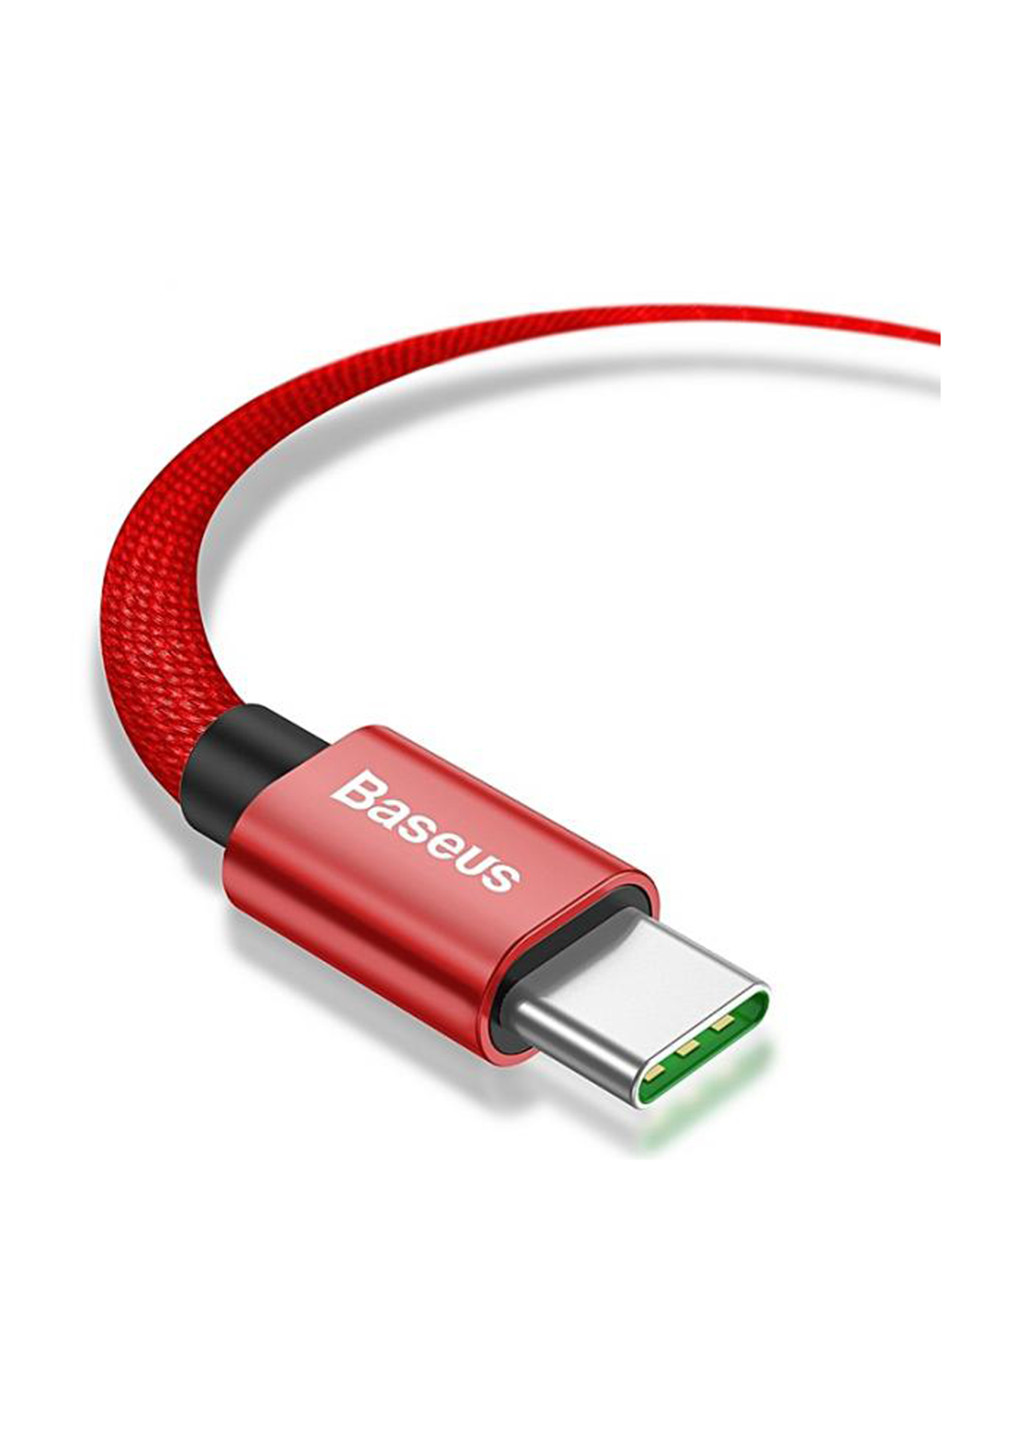 Кабель Double Fast Charging USB Cable USB for Type-C 5A 1M Red (CATKC-A09) Baseus double fast charging usb cable type-c (135000241)